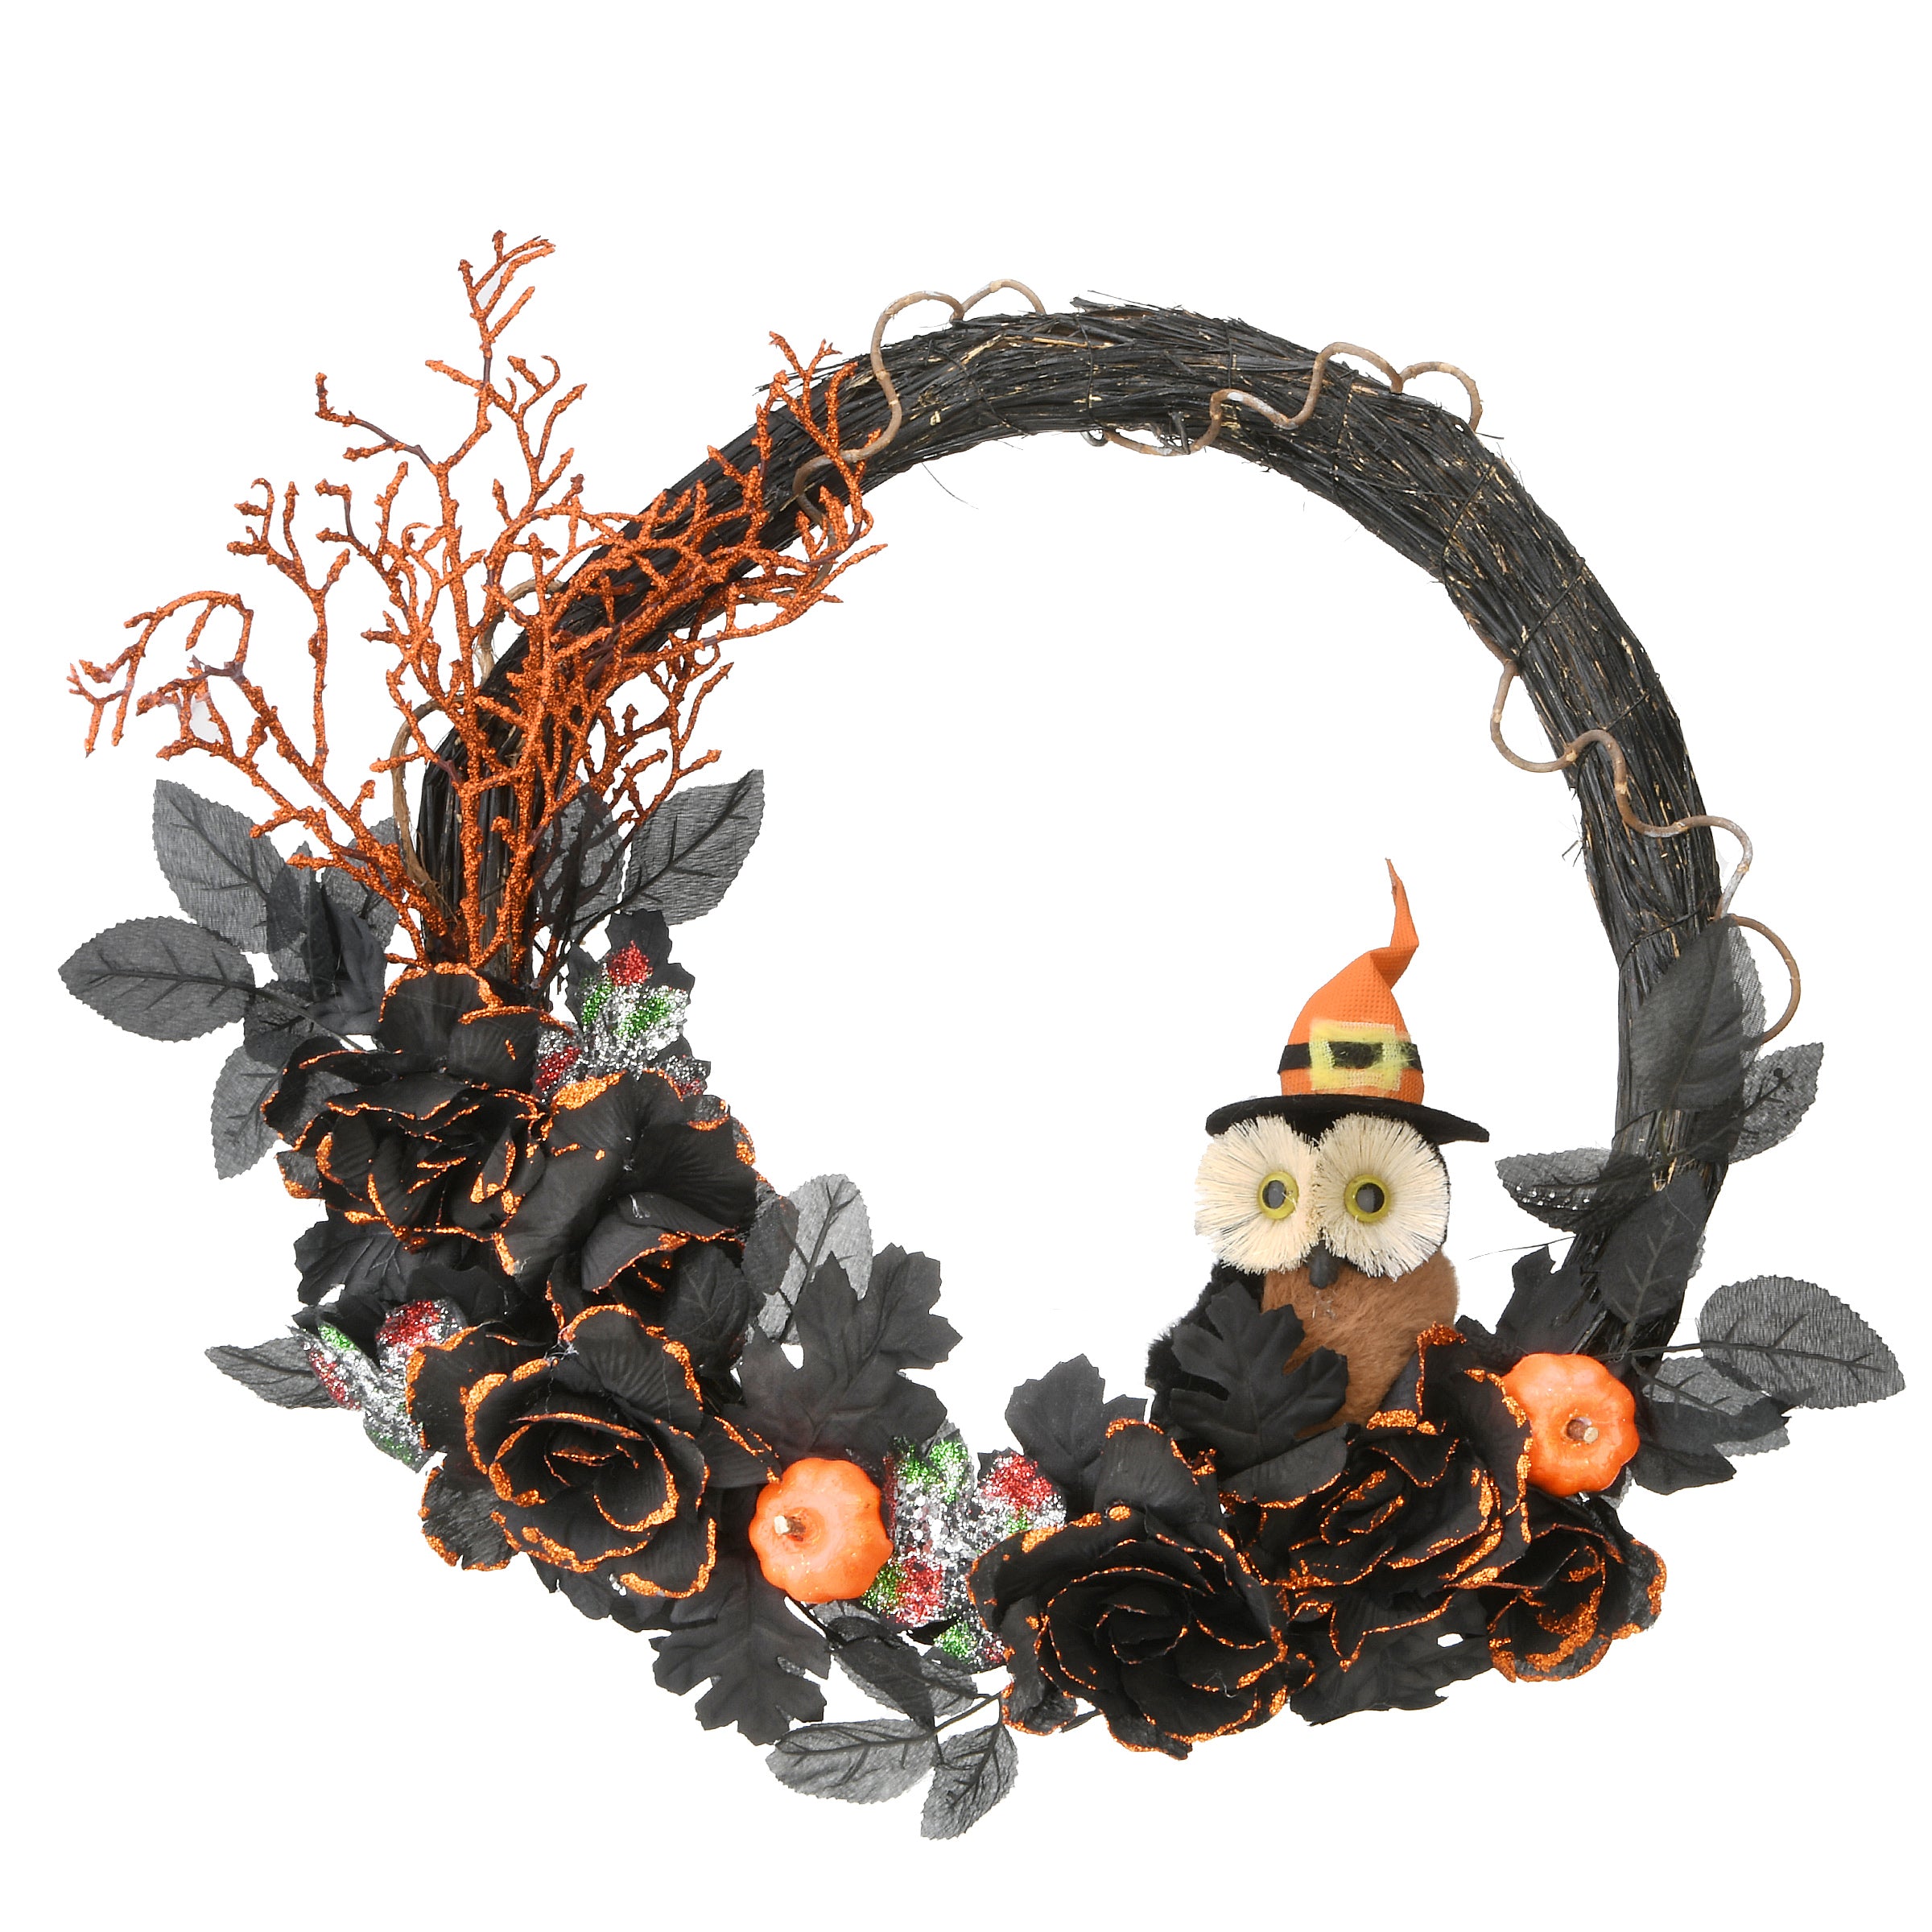 Halloween Artificial Owl Wreath, Decorated with Owl Figurine, Assorted Black Leaves, Orange Branches, 19 Inches